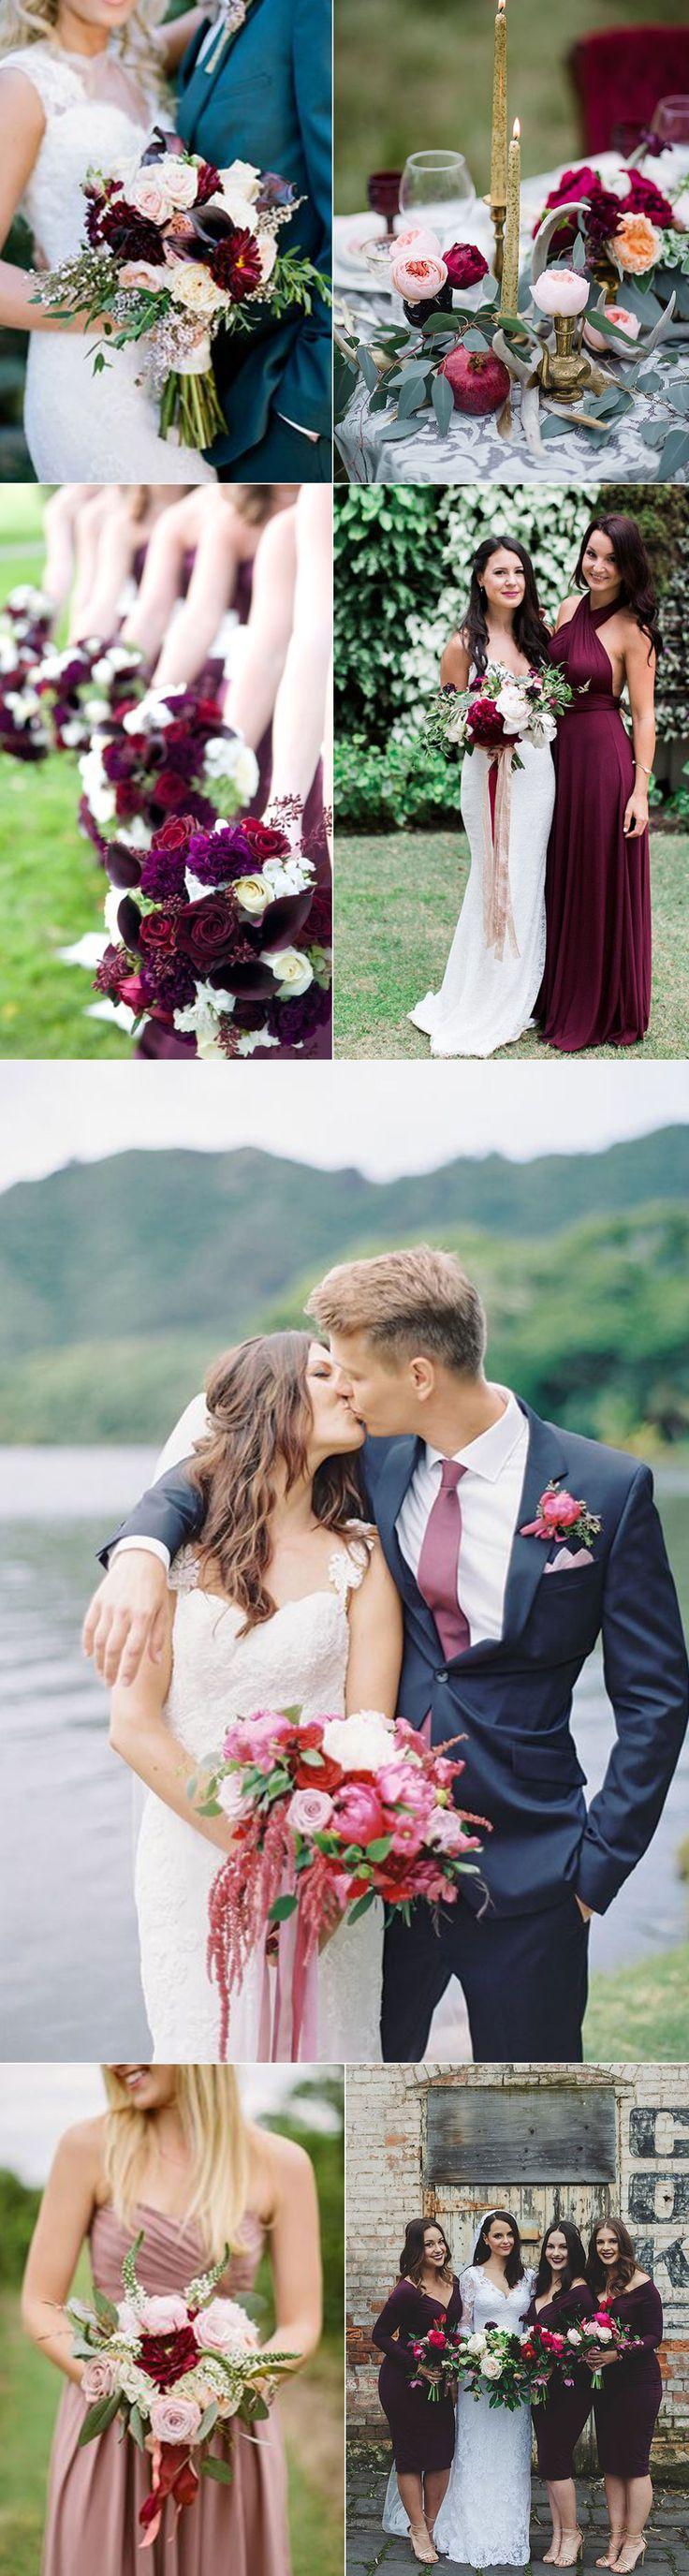 Свадьба - Wedding Inspiration For Plums And Pinks   